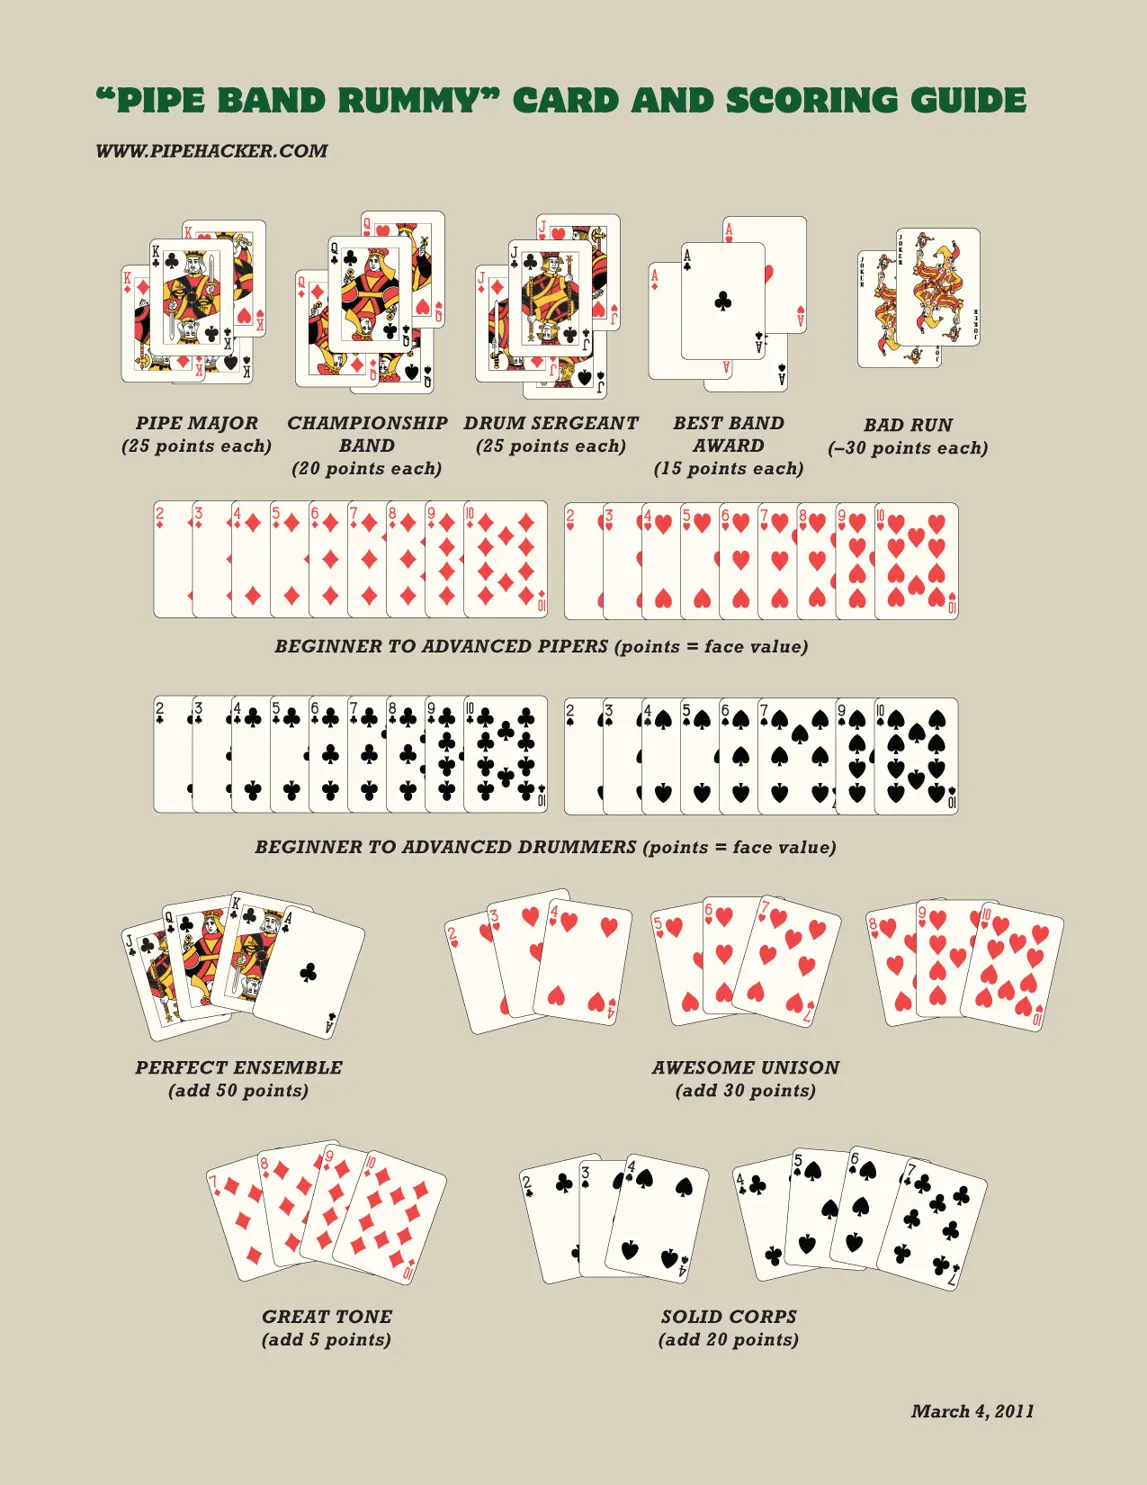 How about rummy up rules?